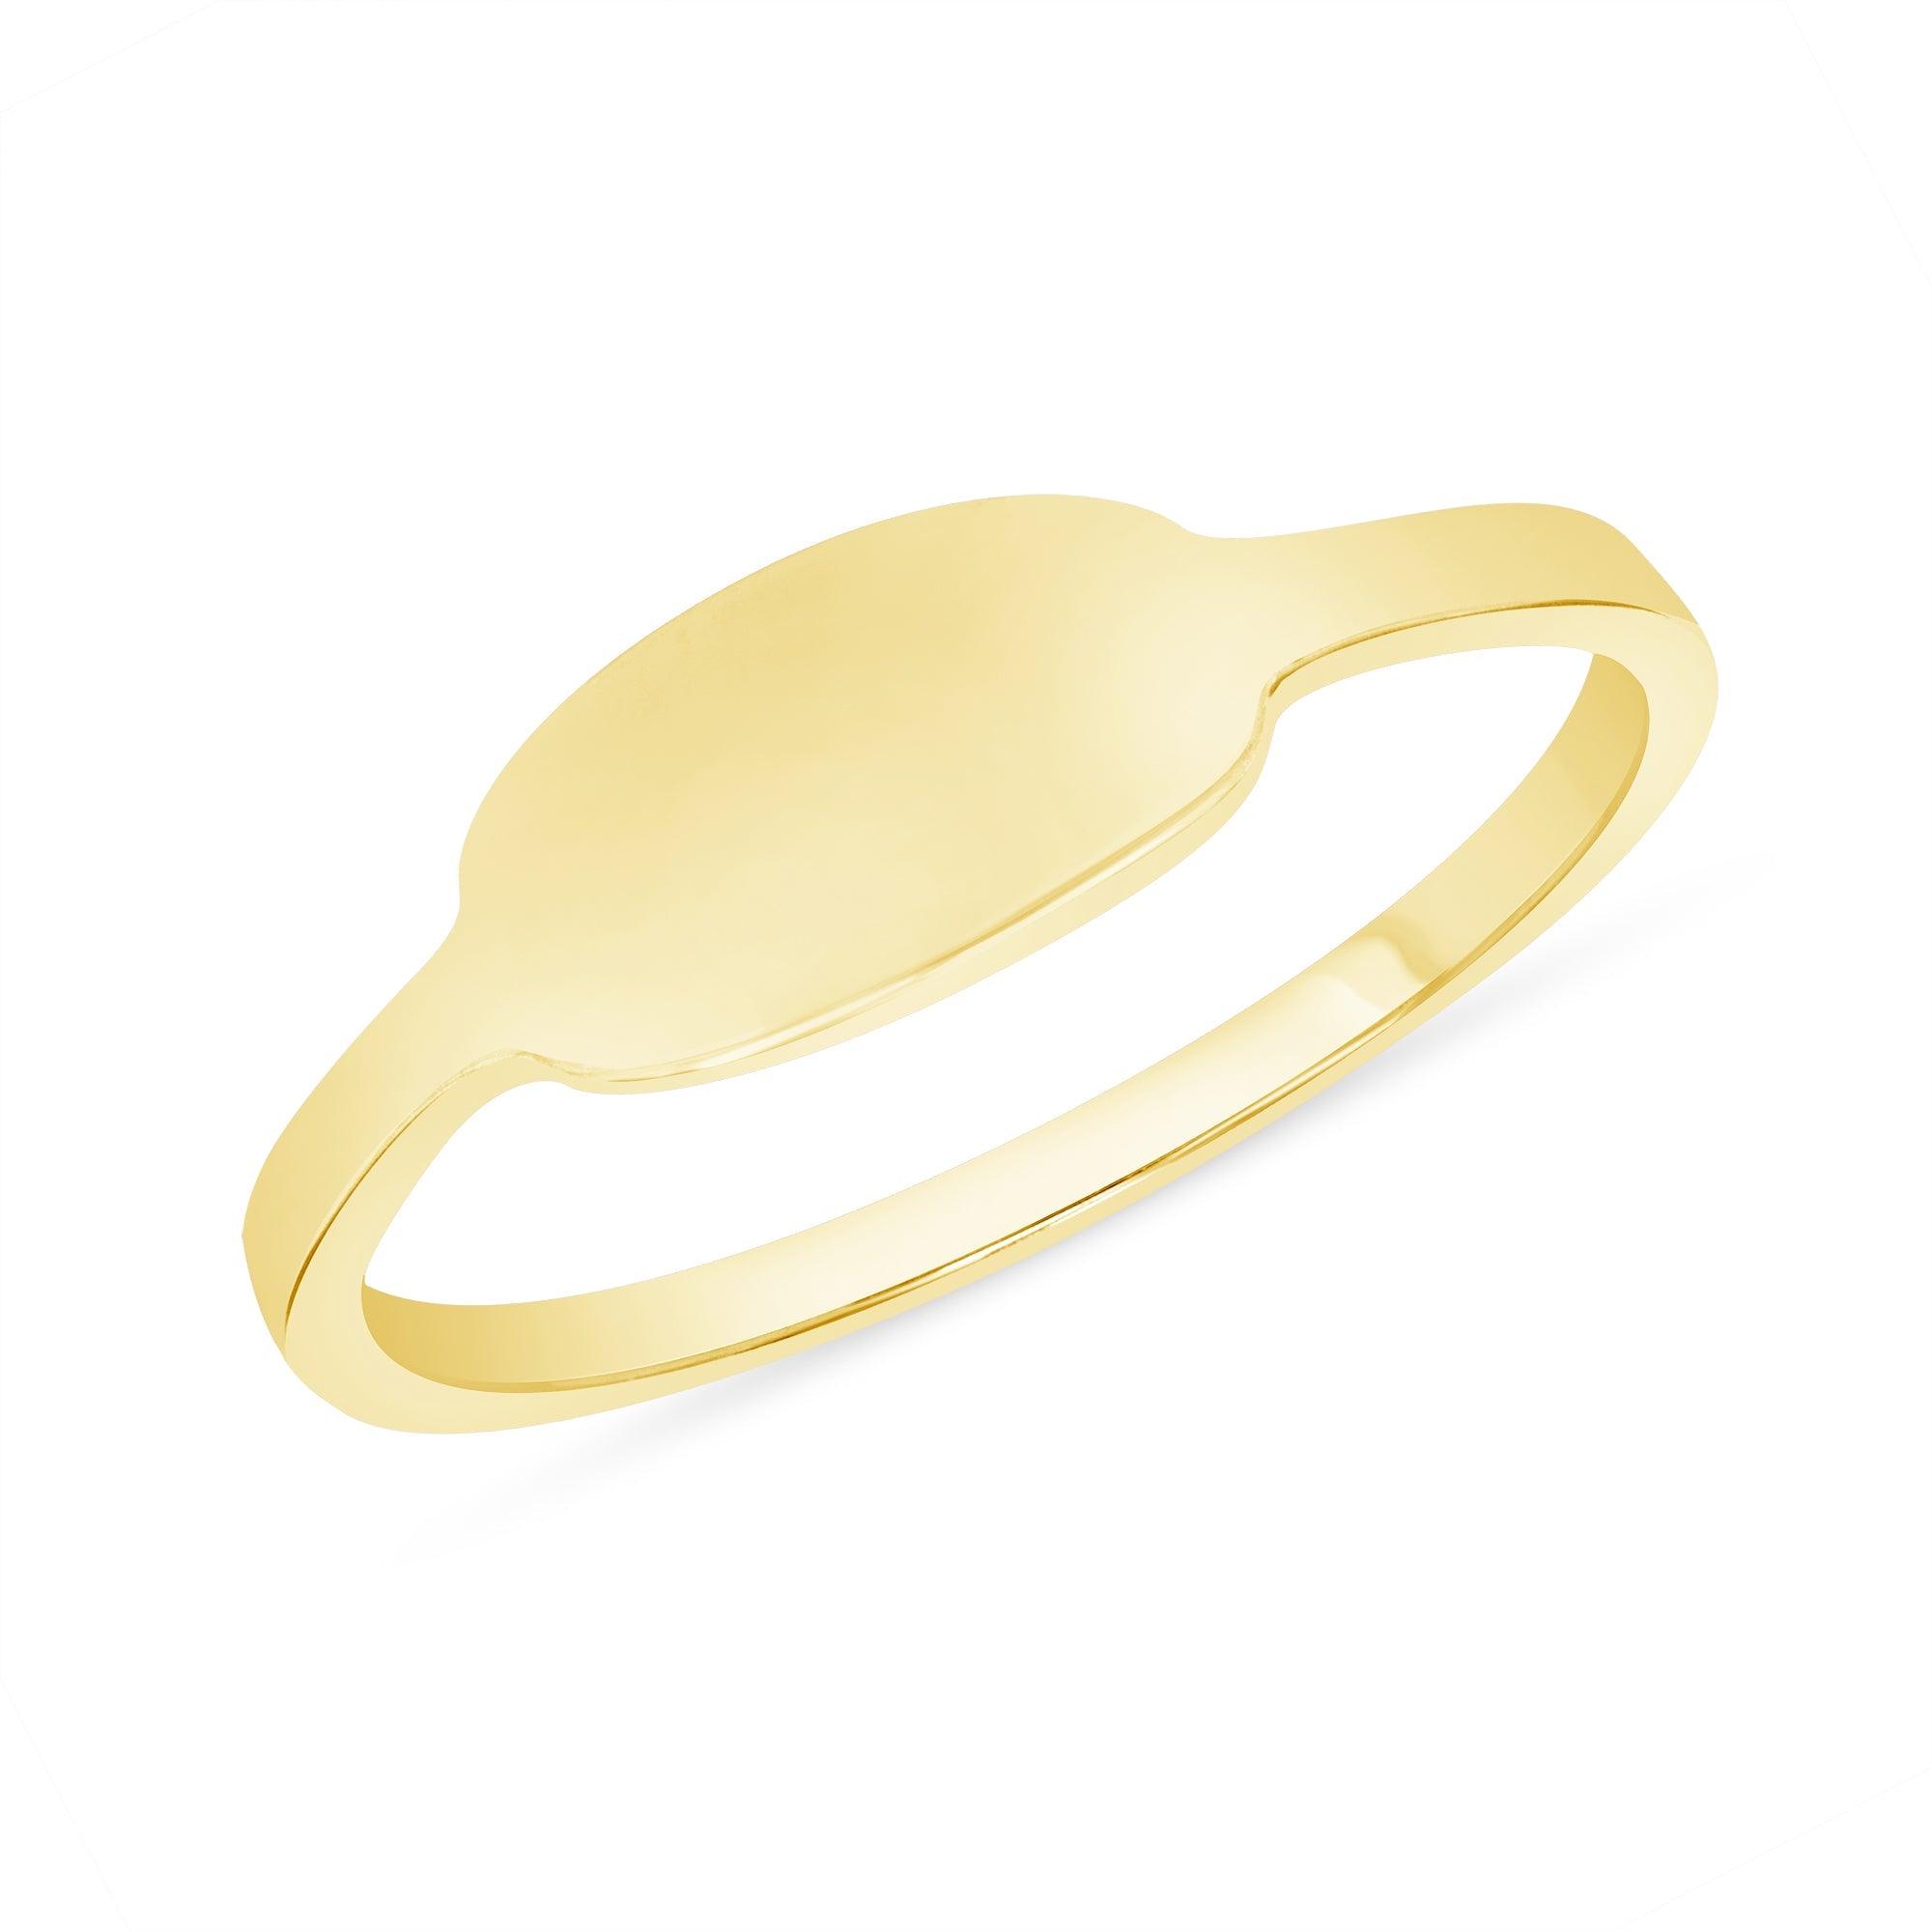 Small Solid Gold Pinky Ring with Engravable Signet from Rafi's Jewelry